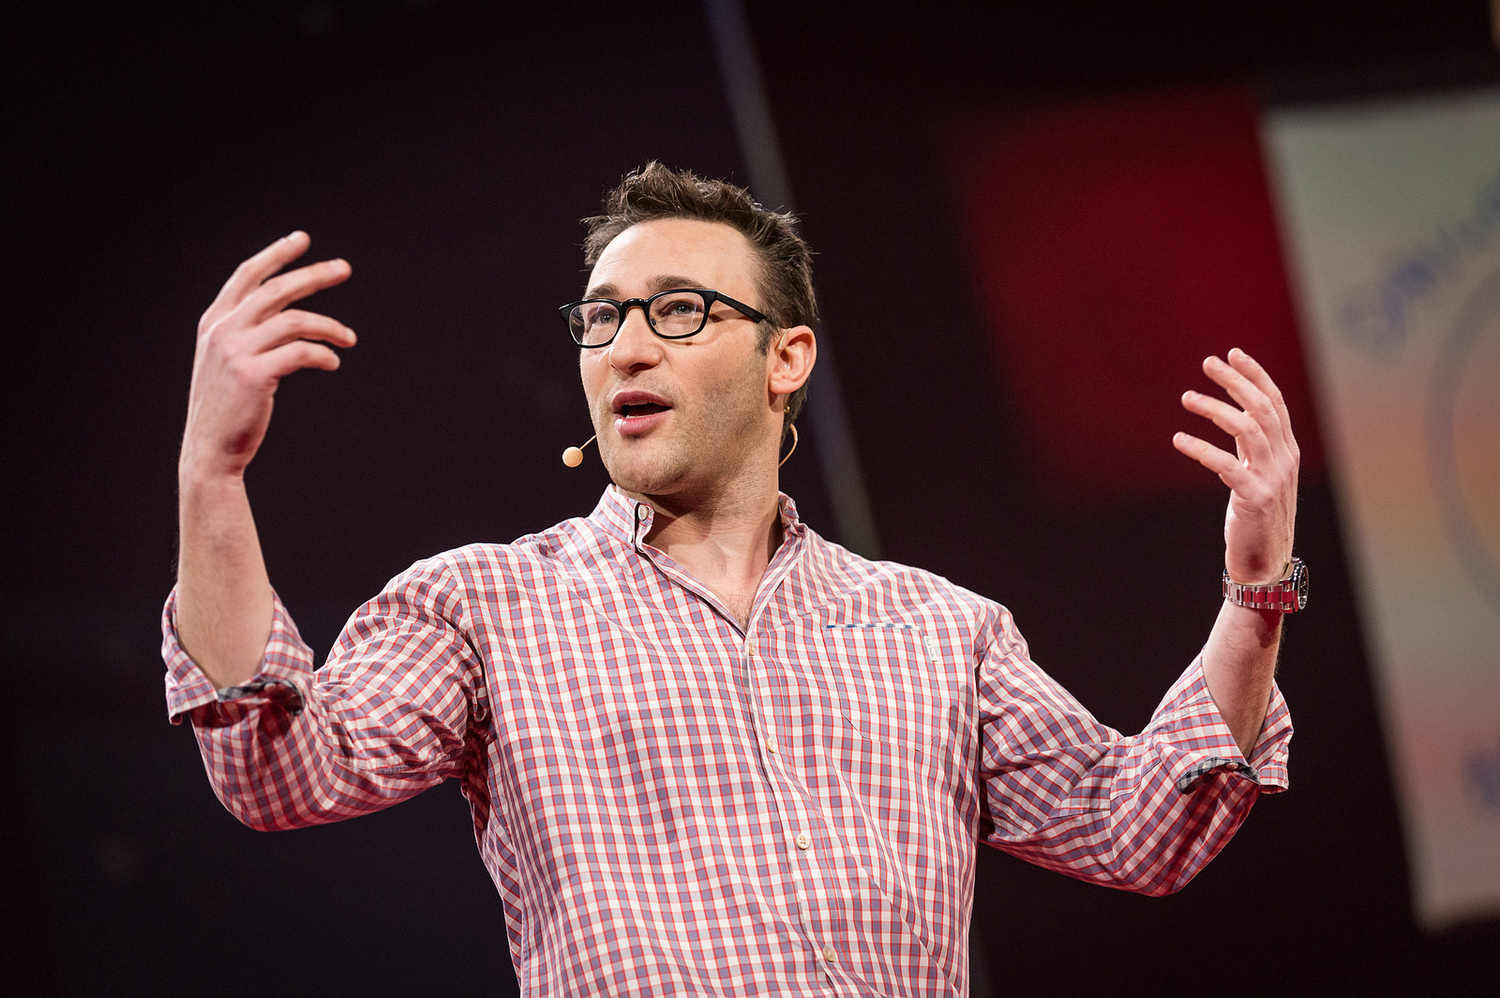 Simon Sinek – Start with Why: How Great Leaders Inspire Action